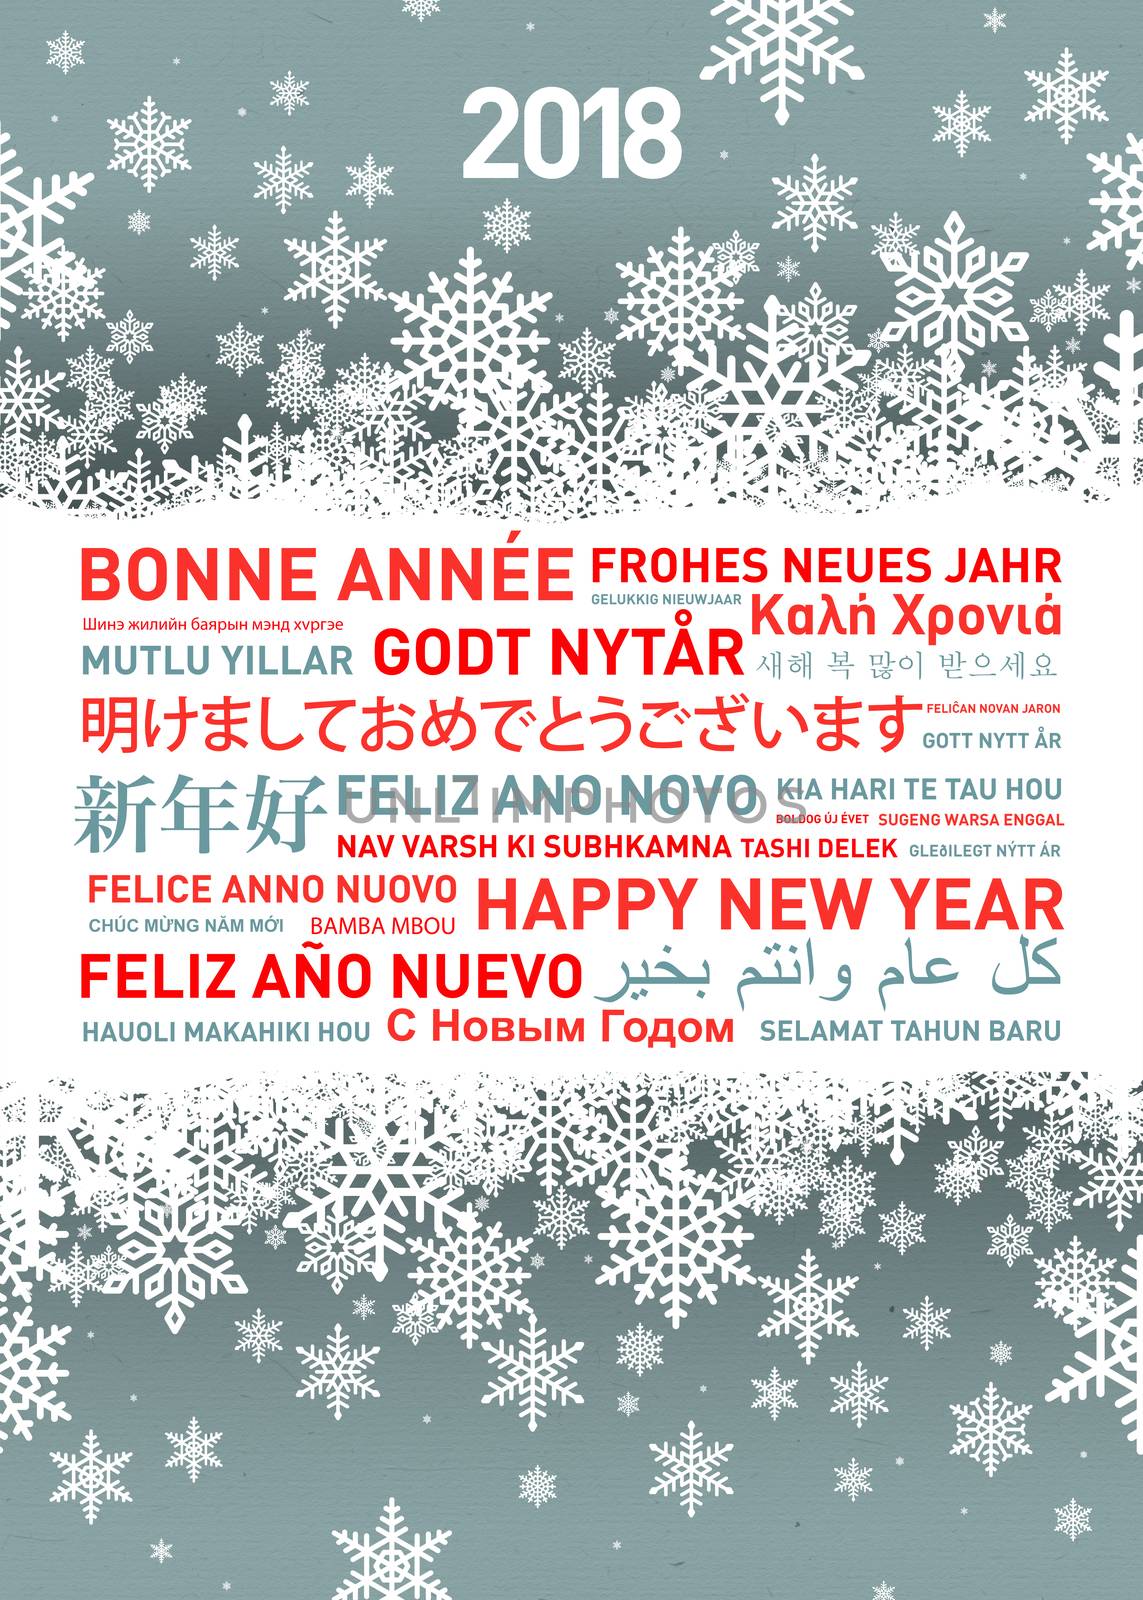 Happy new year greetings card in different world languages